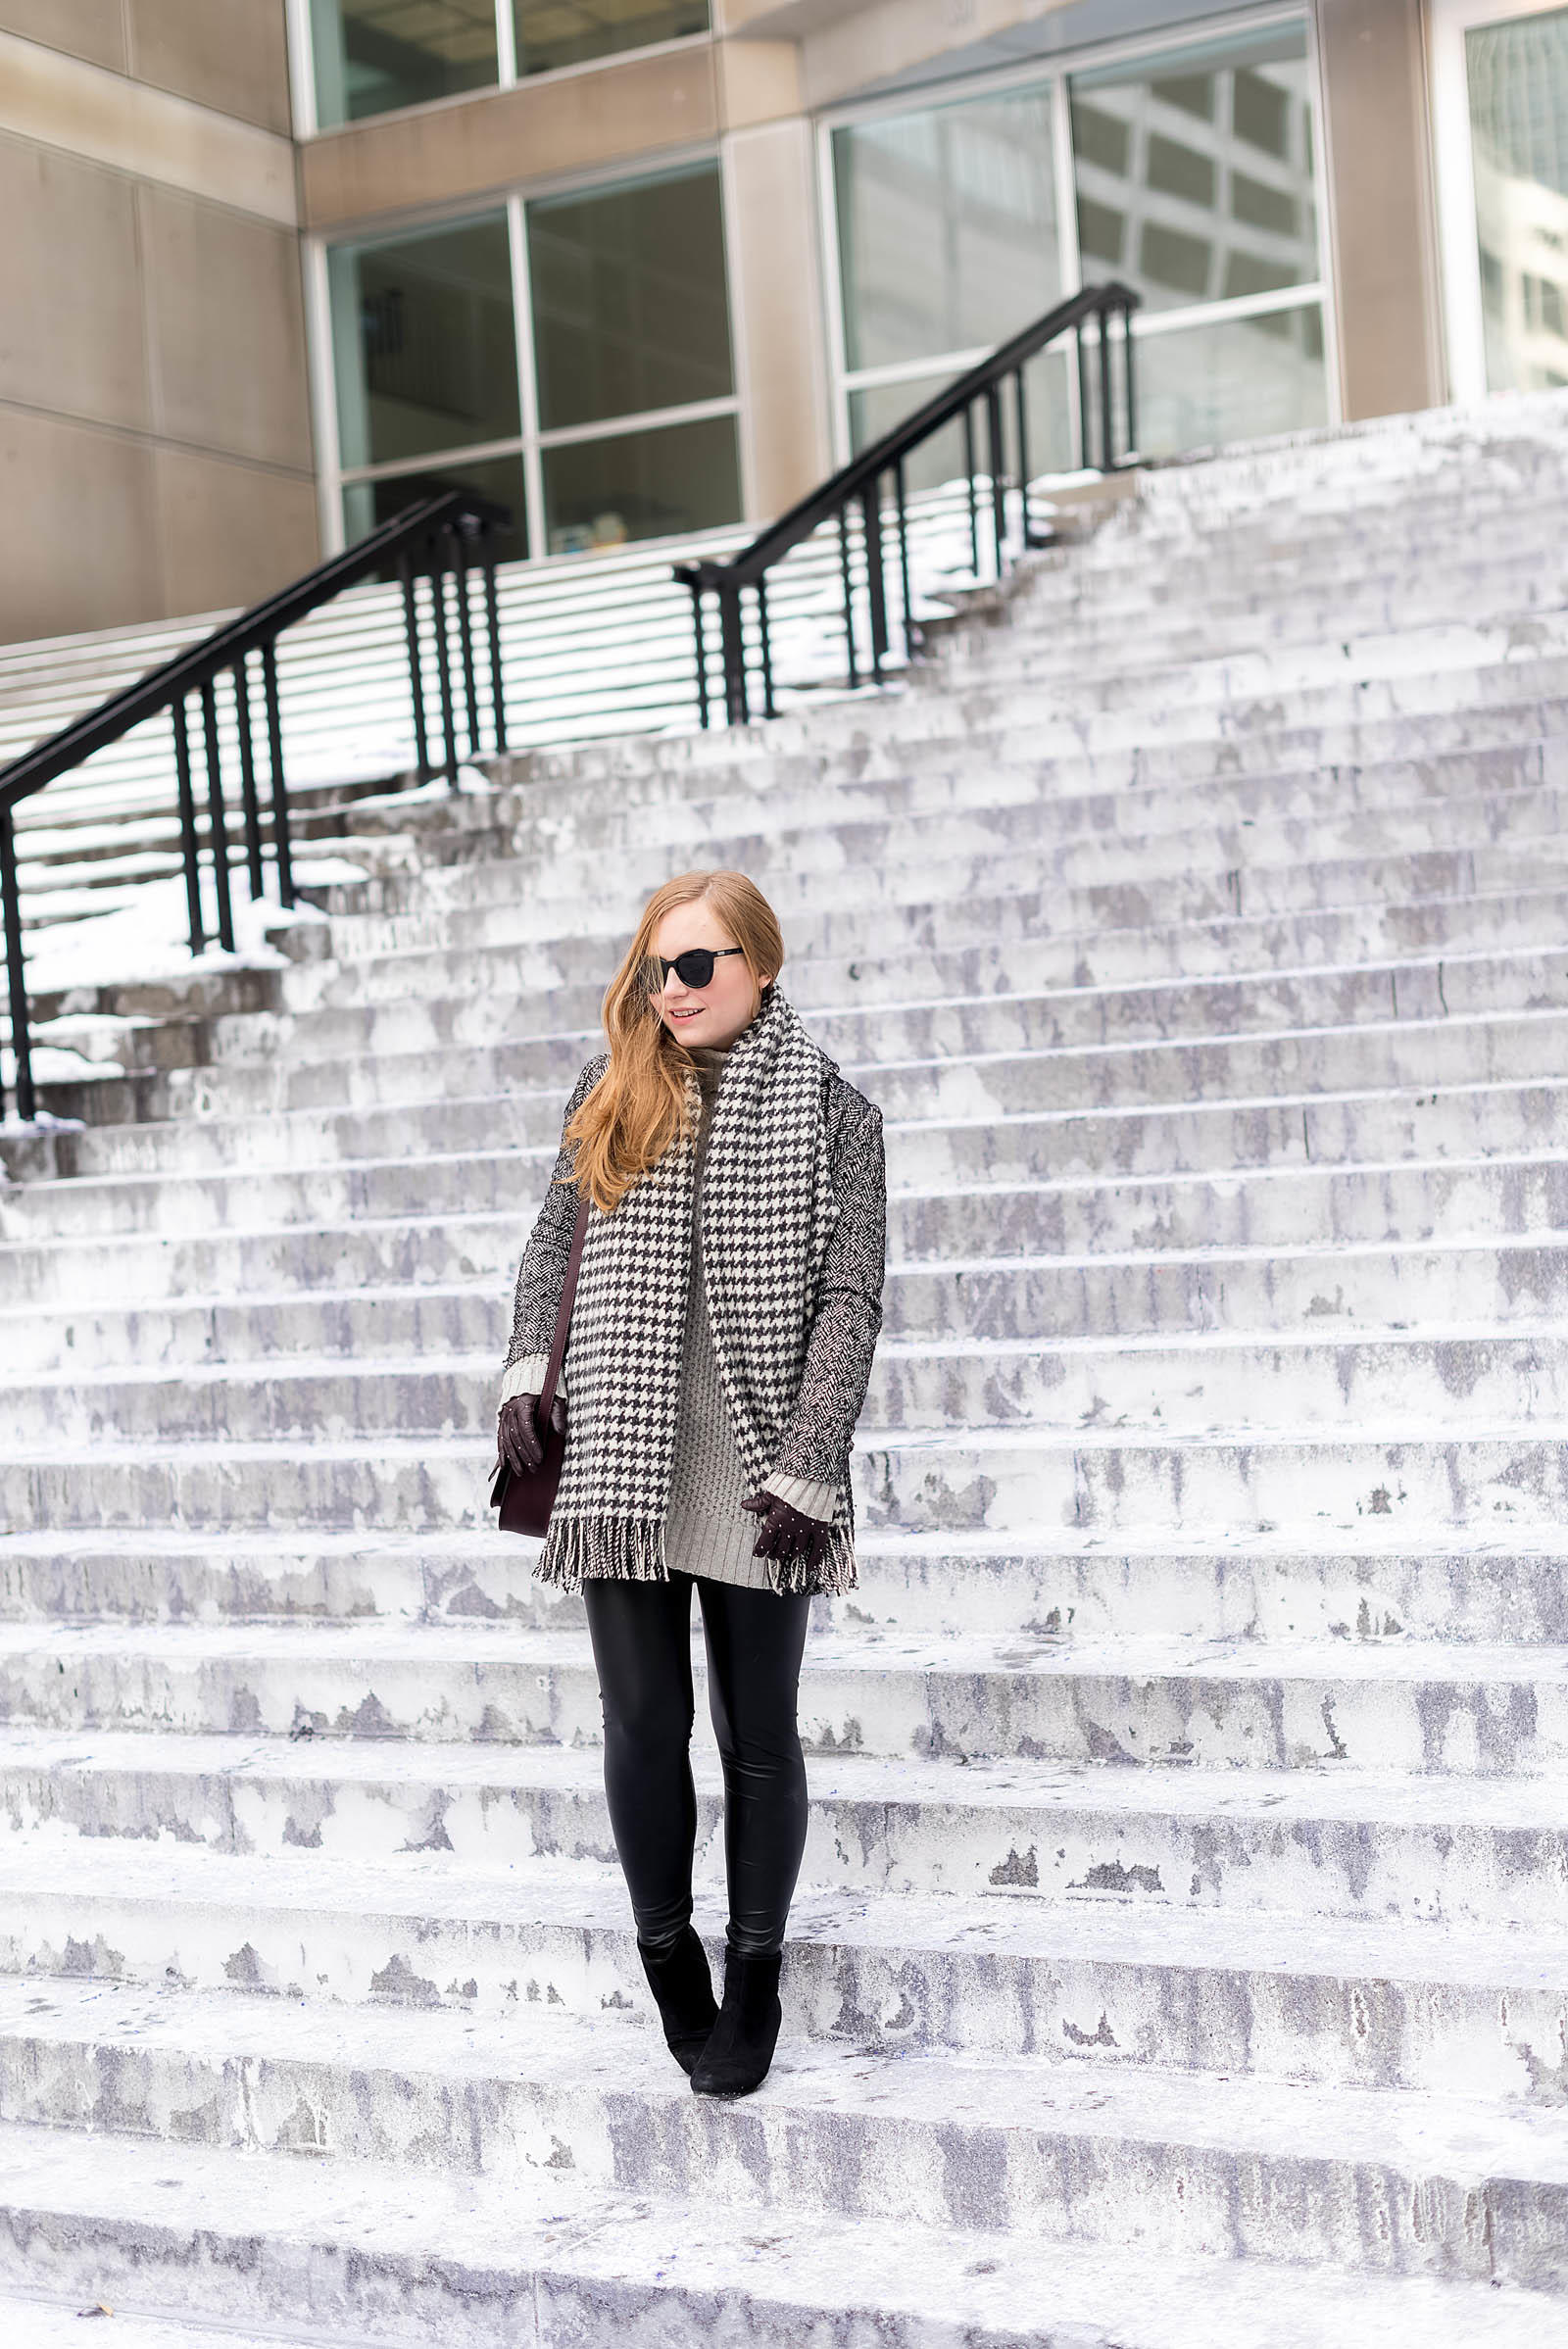 Herringbone Houndstooth Burgundy Leather Winter Outfit